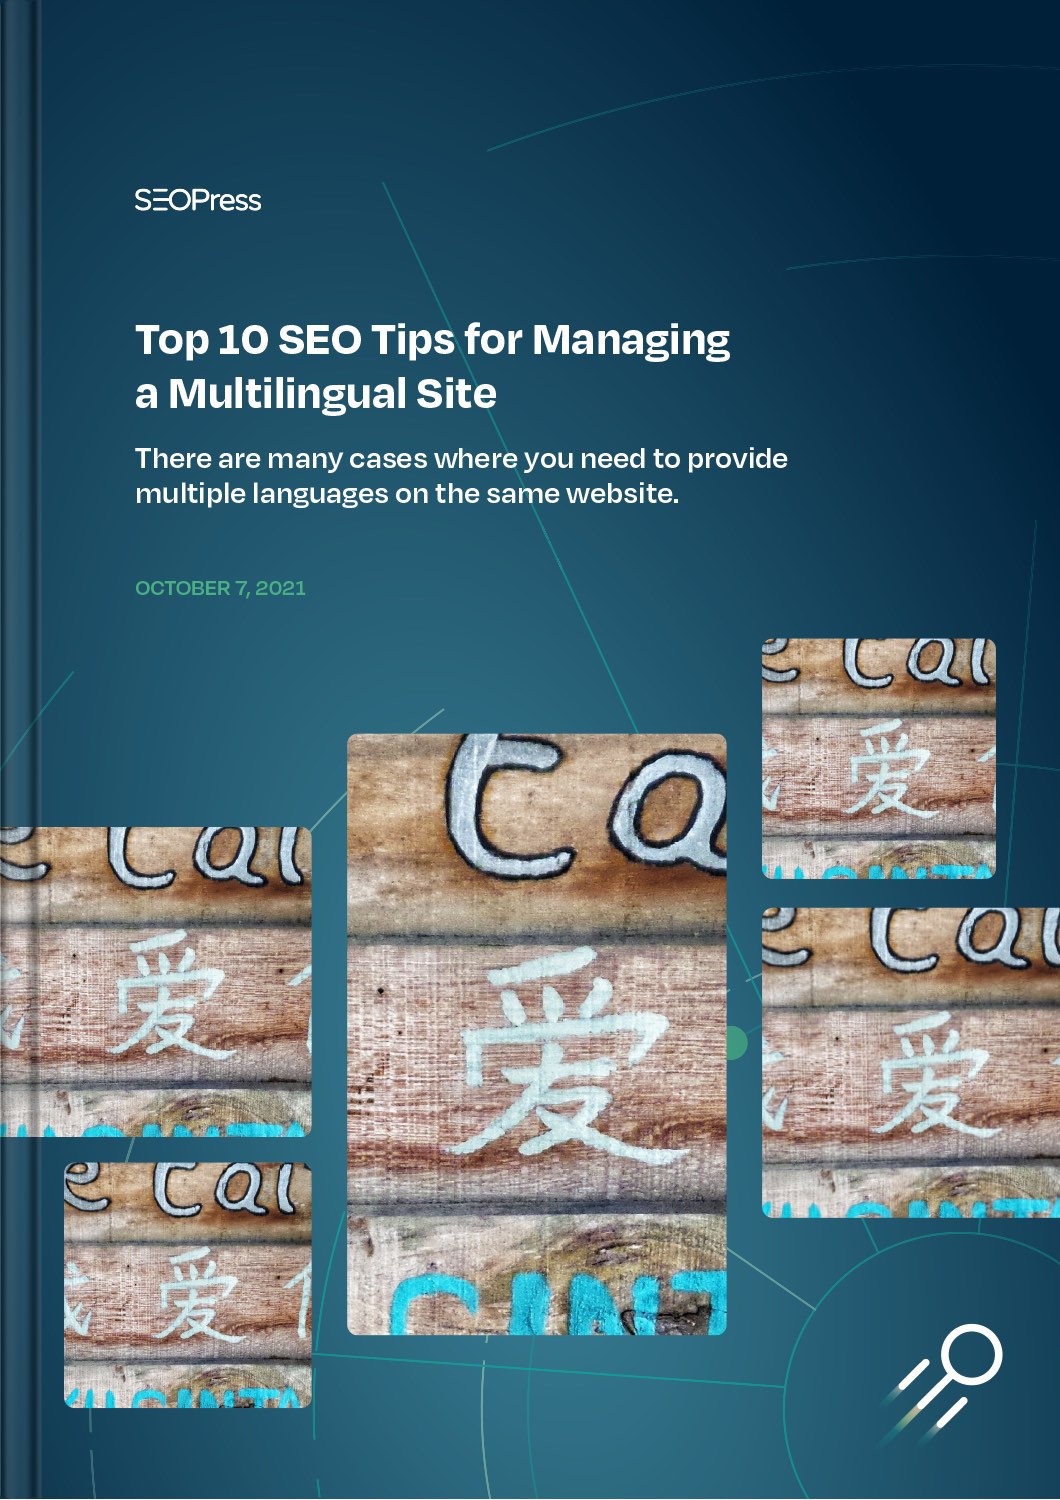 Top 10 SEO Tips for Managing a Multilingual Site